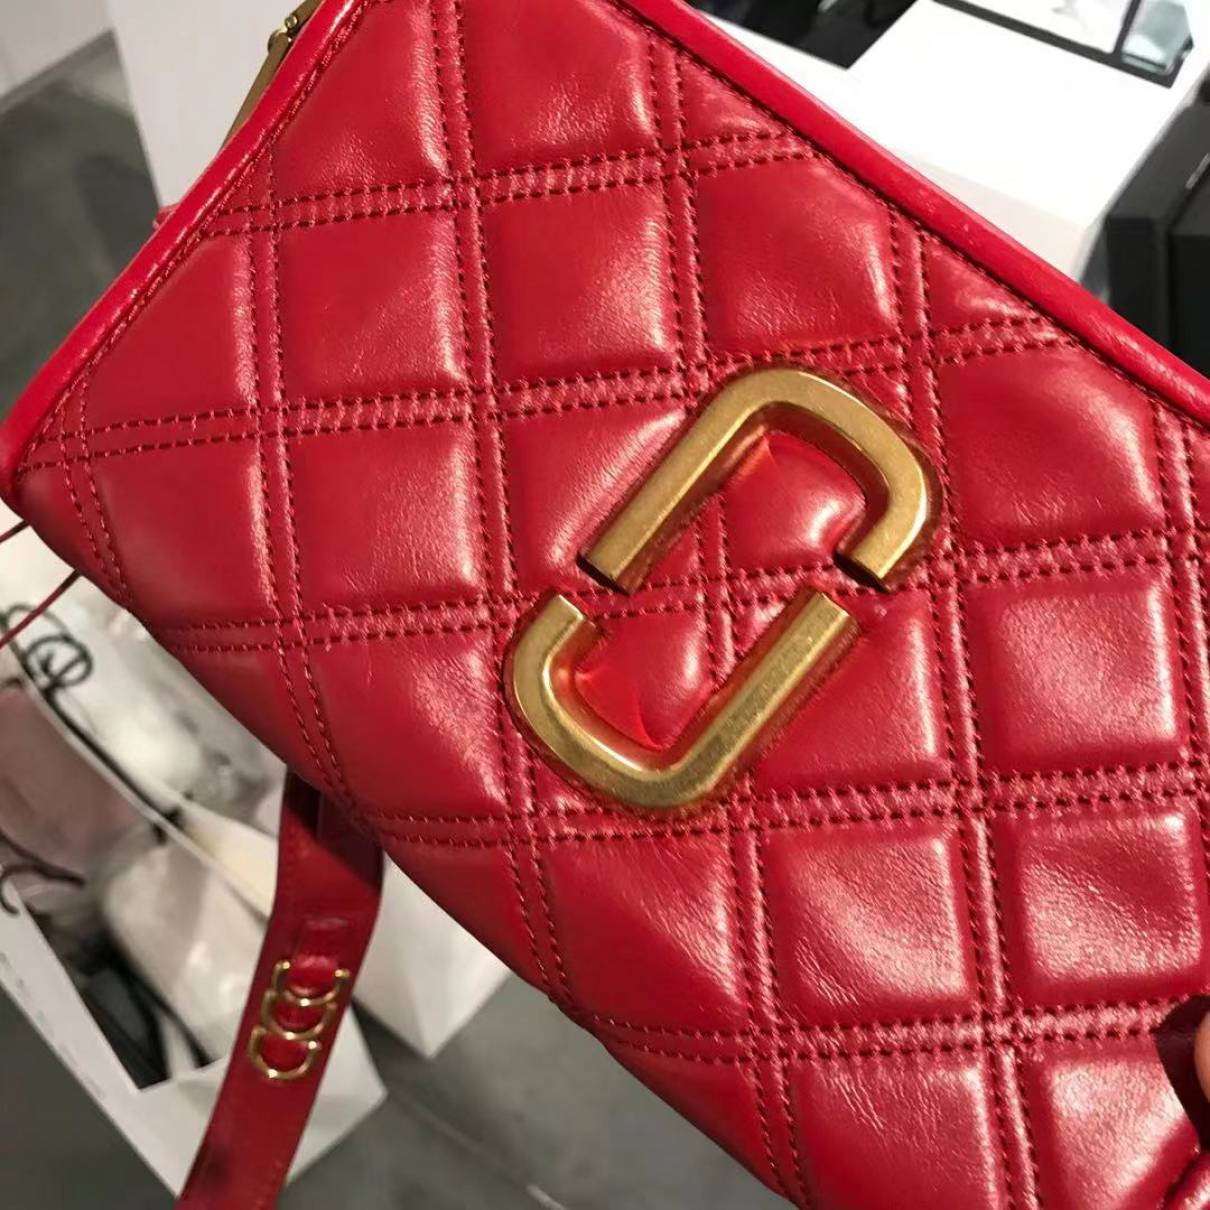 Marc Jacobs Softshot 21 Leather Crossbody Bag In Red